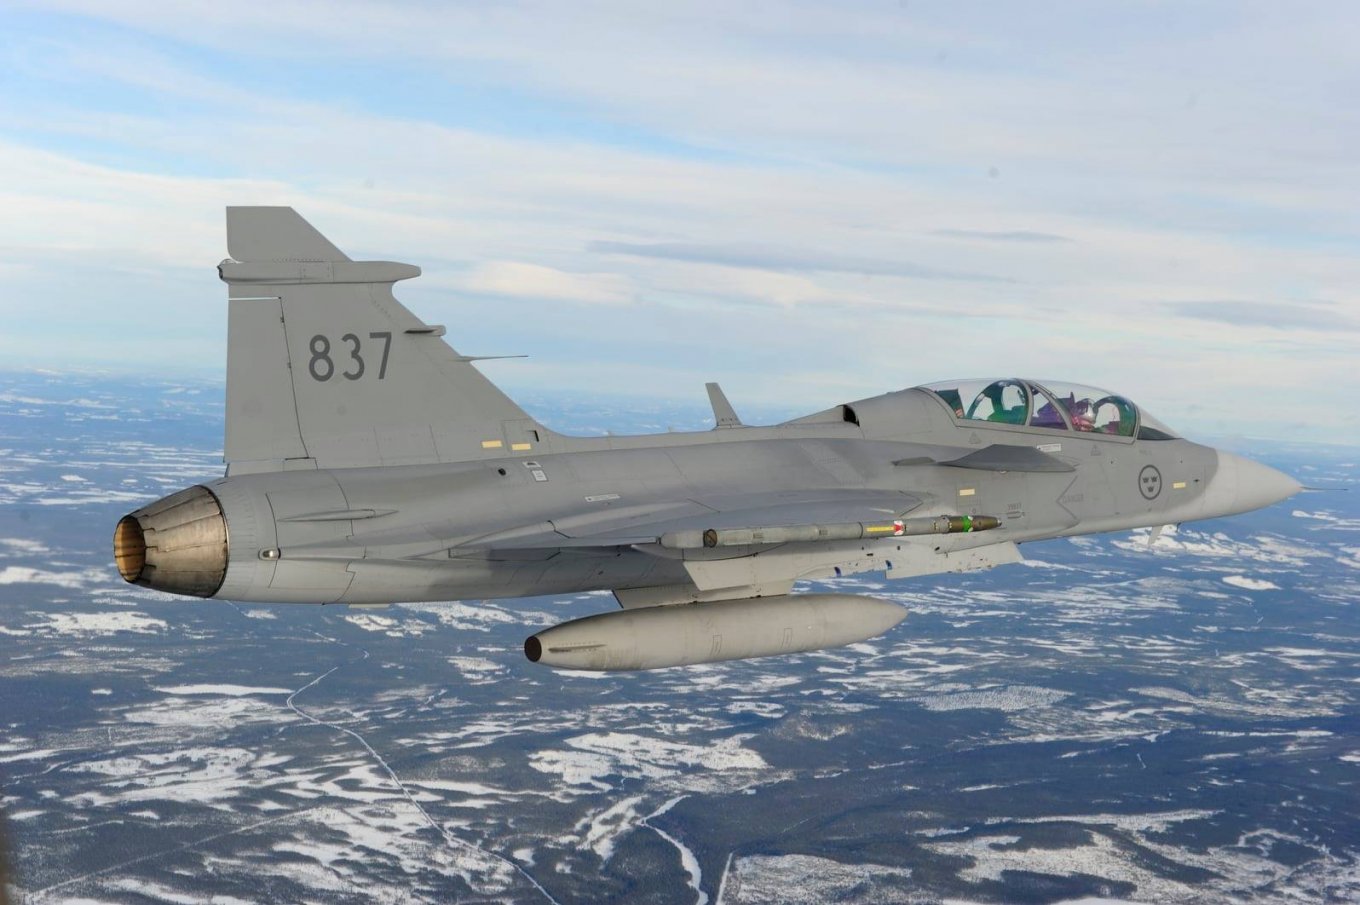 Saab JAS 39 Gripen, The F-16 Delivery Rate to Ukraine Announced as Well As Whether the Country Will Have Swedish Gripen, Defense Express